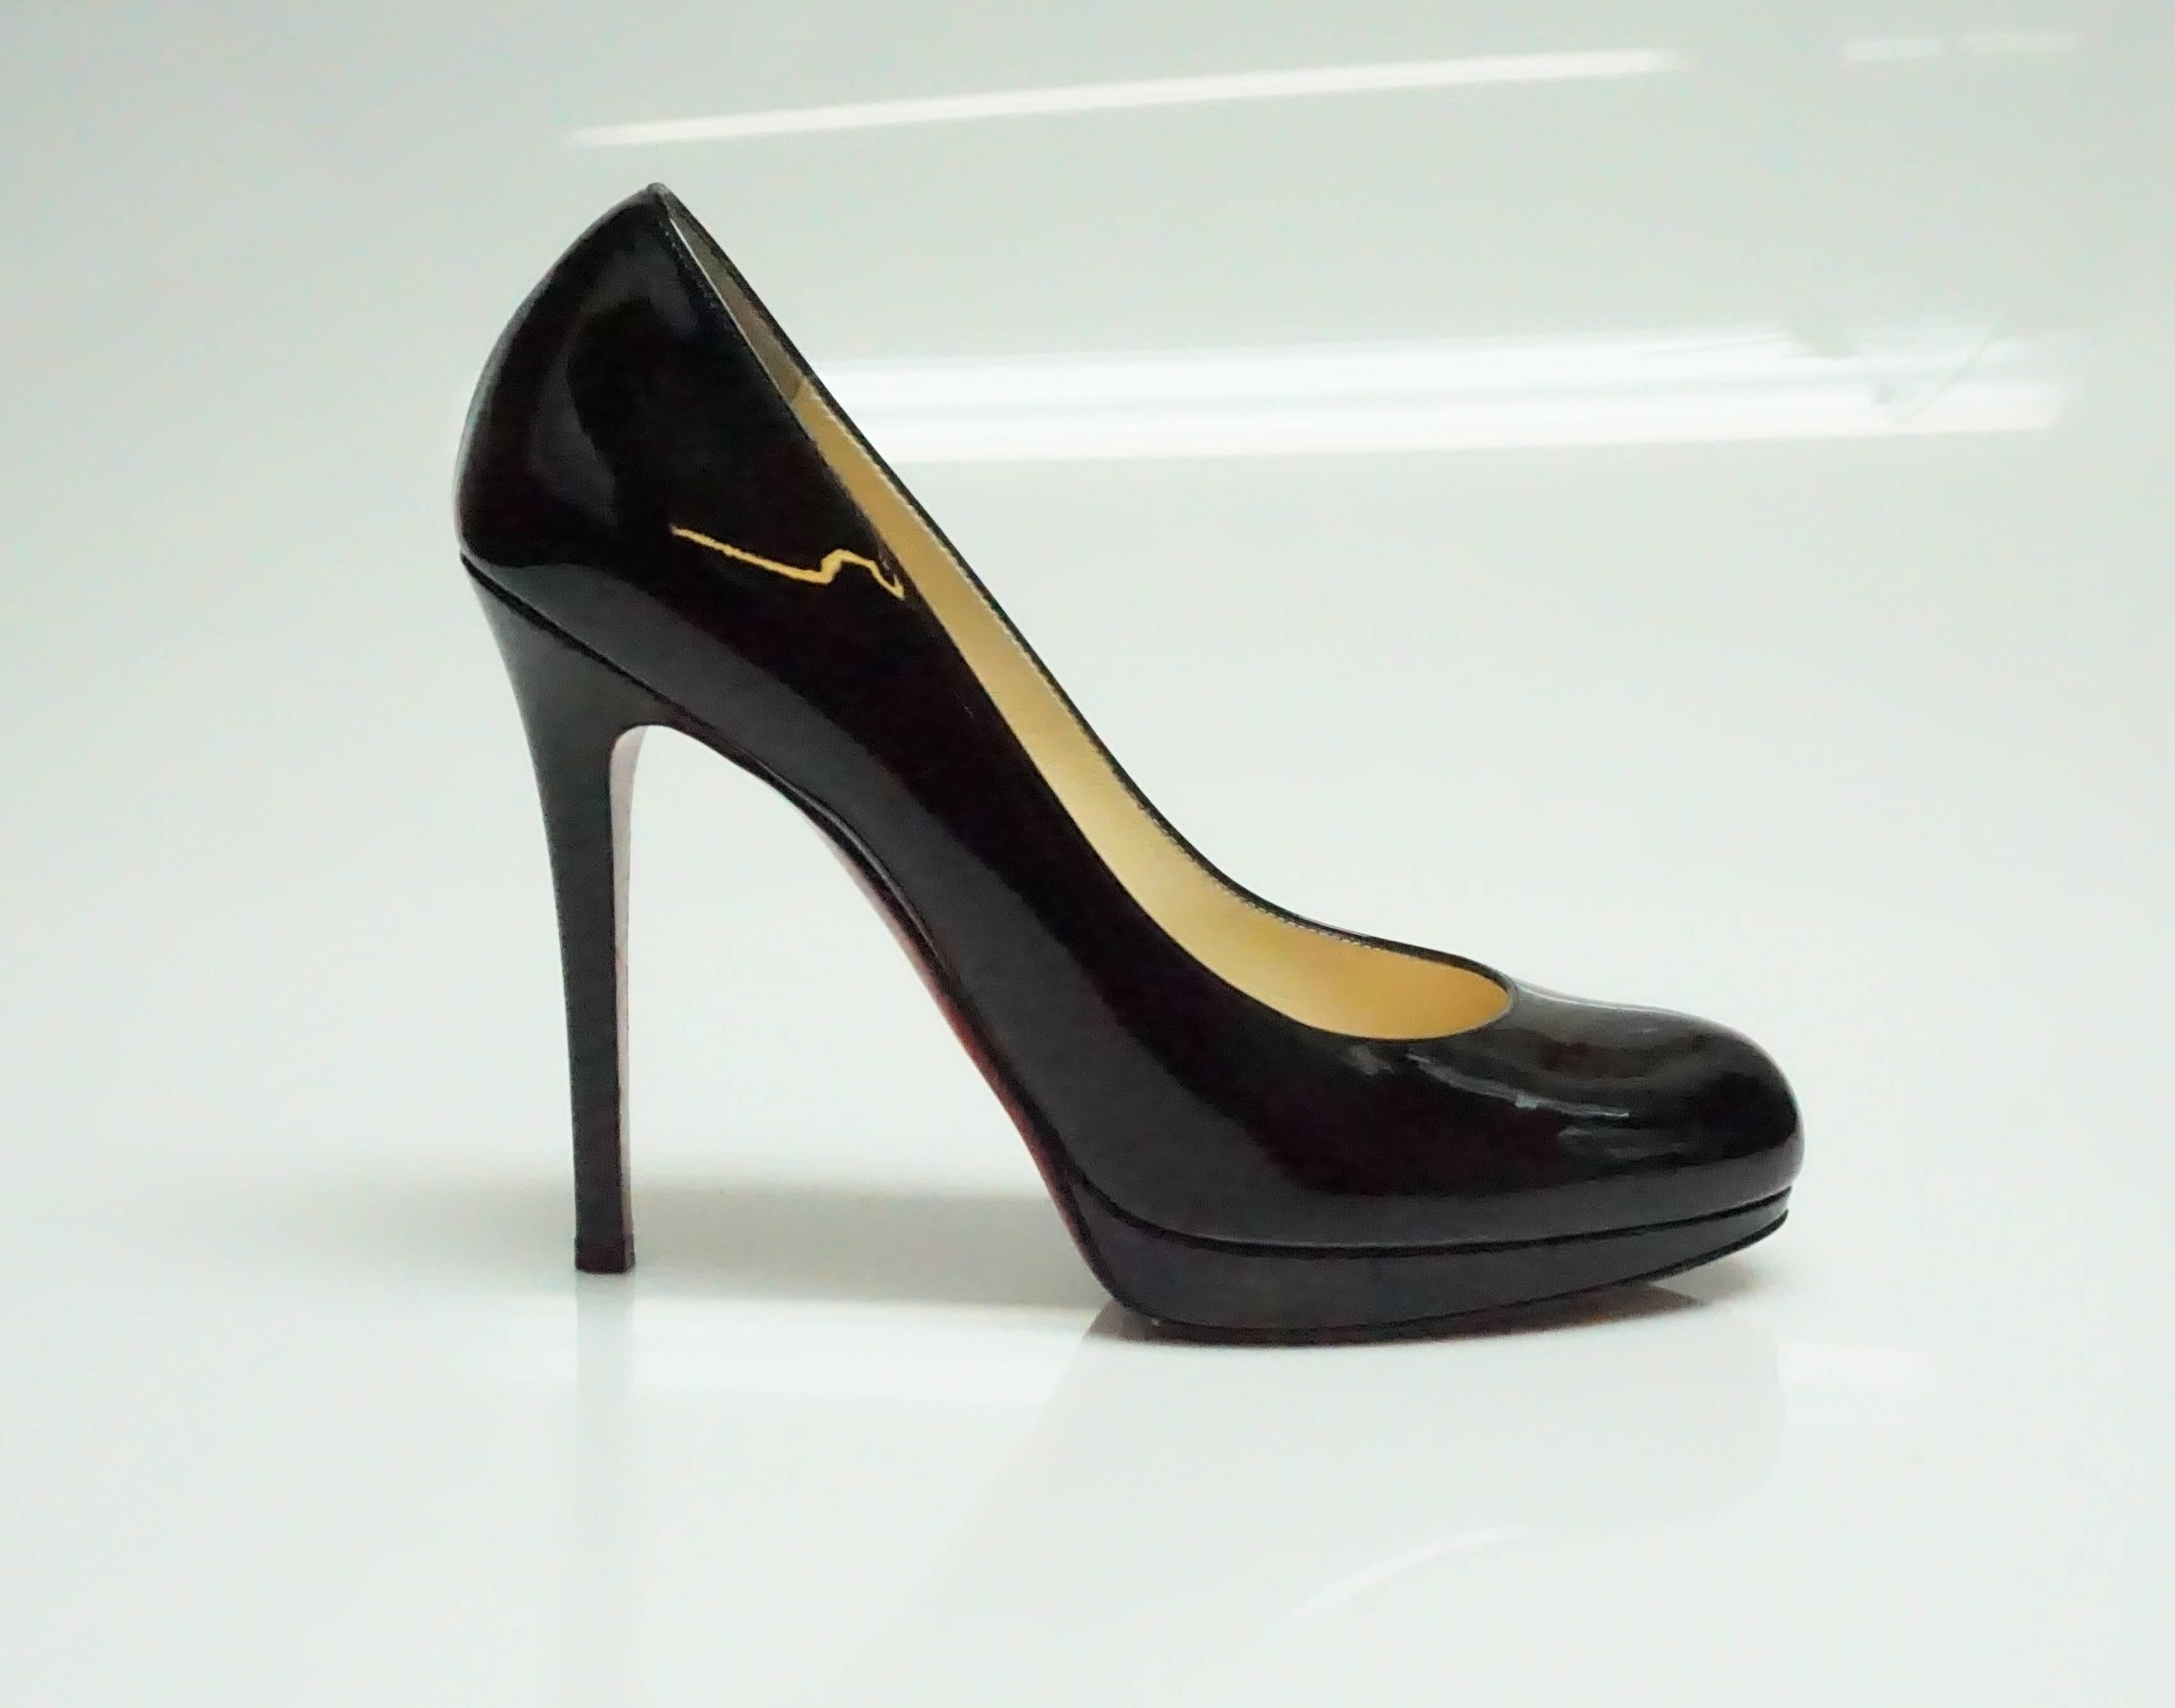 Christian Louboutin Black Patent Pumps - 37  These classic Louboutin pumps are in excellent condition. The bottom of the show has some wear and there are a few scuff marks on the toe of the shoe. 
Heel height: 4.5